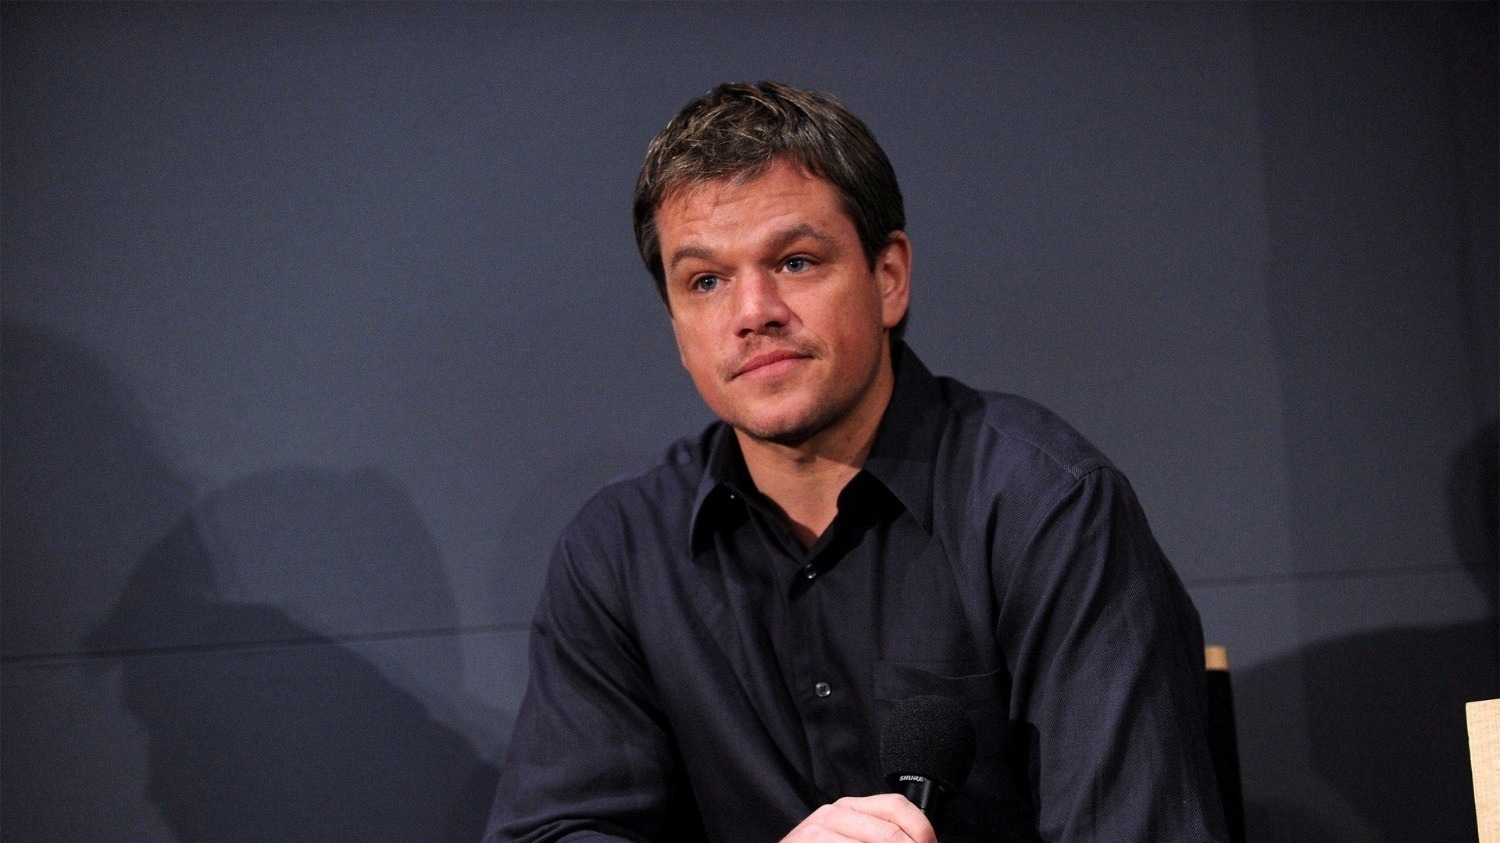 “Time to shut your mouth for a while”: Matt Damon promised not to talk about harassment anymore - Matt Damon, Harassment, Hollywood, Scandal